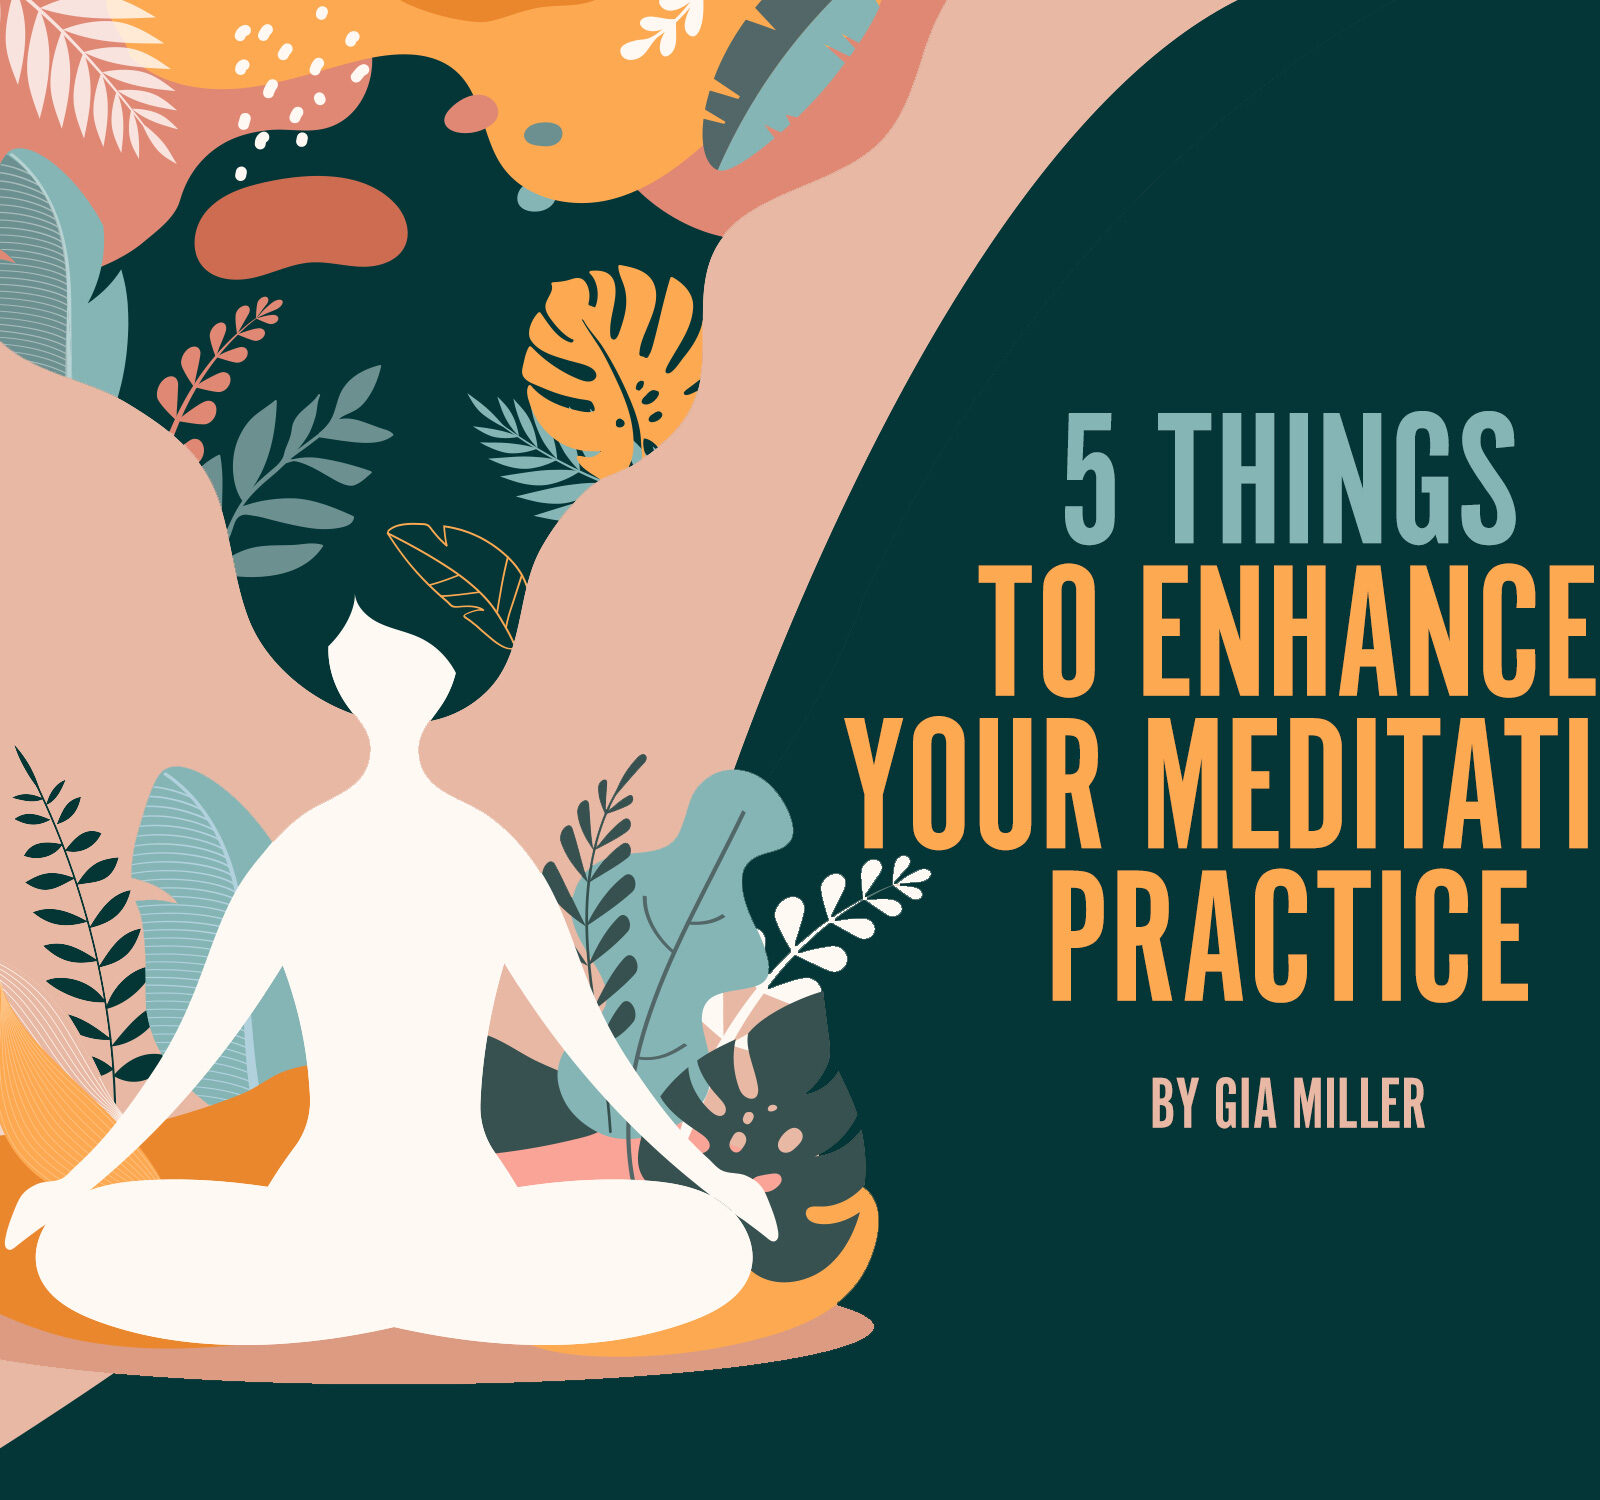 5 Things to Enhance Your Meditation Practice